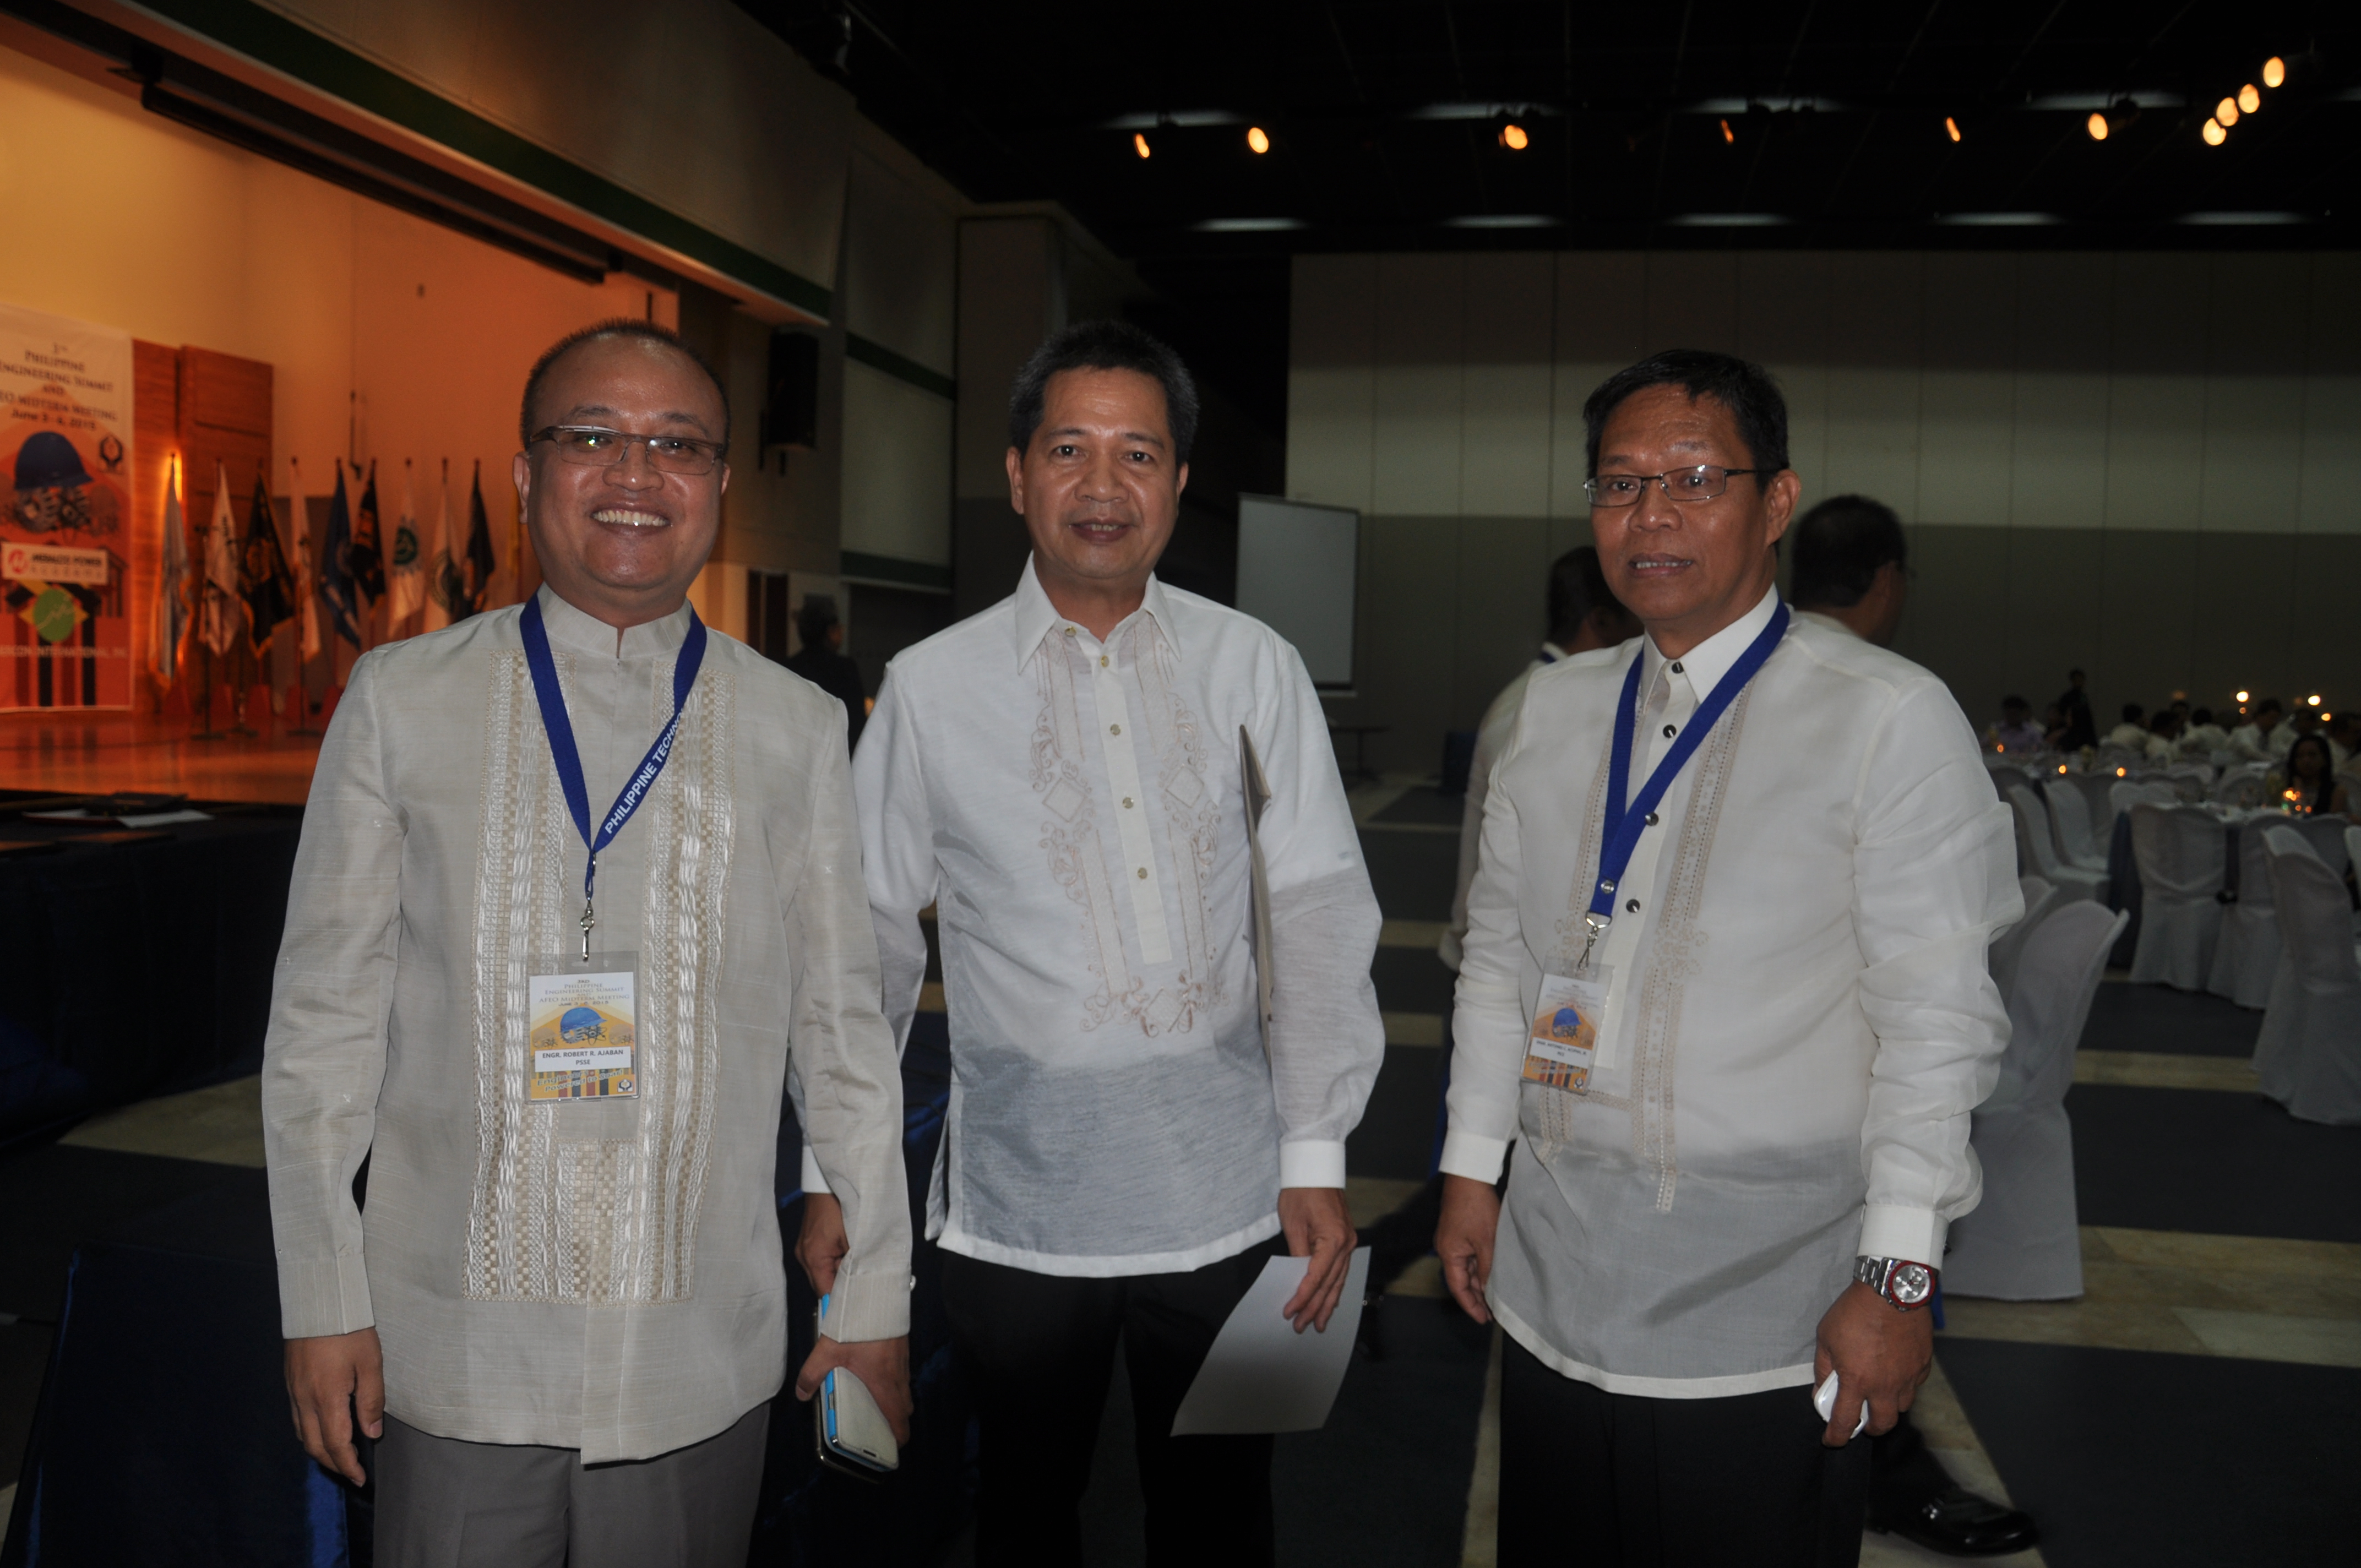 PTC Deputy Exec. Direc. with the newly conferred APEC Engineers Engr. Antonio Acupan (PICE) and Robert Ajaban (PSSE)